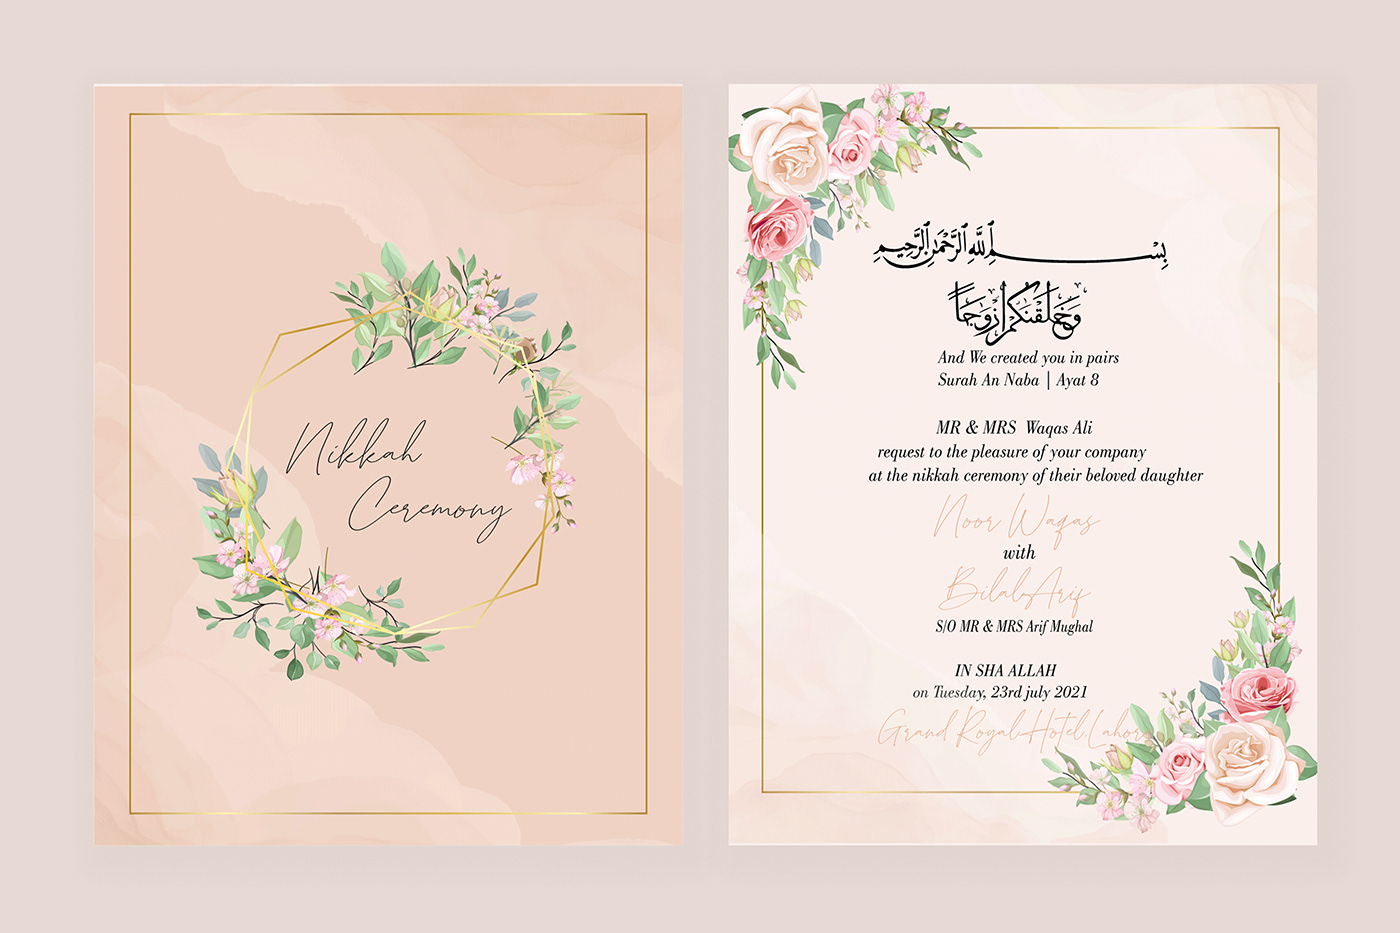 barat cards cards engagement cards floral cards marriage Marriage cards nikkah cards pakistani wedding wedding wedding cards